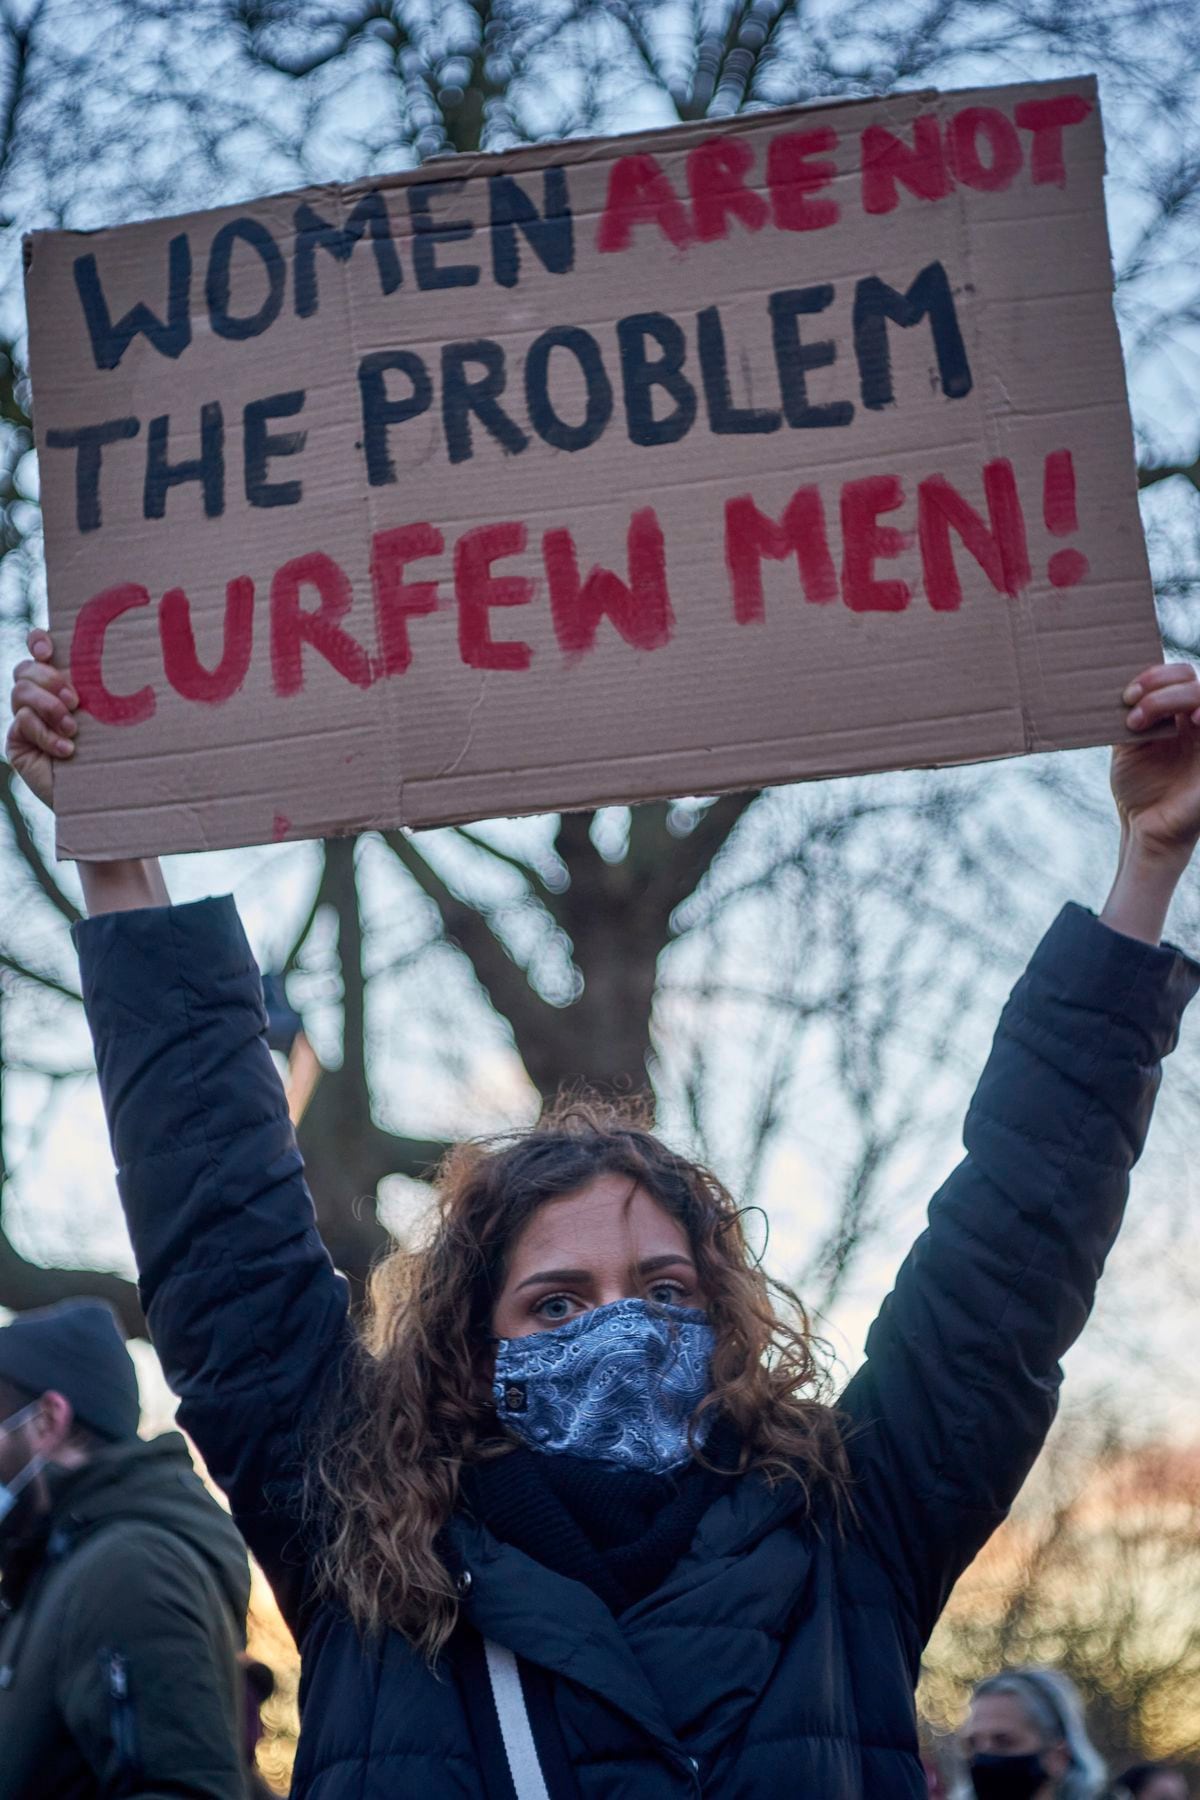 A protestor showing support for Baroness Jones’s suggestion. (Shutterstock)